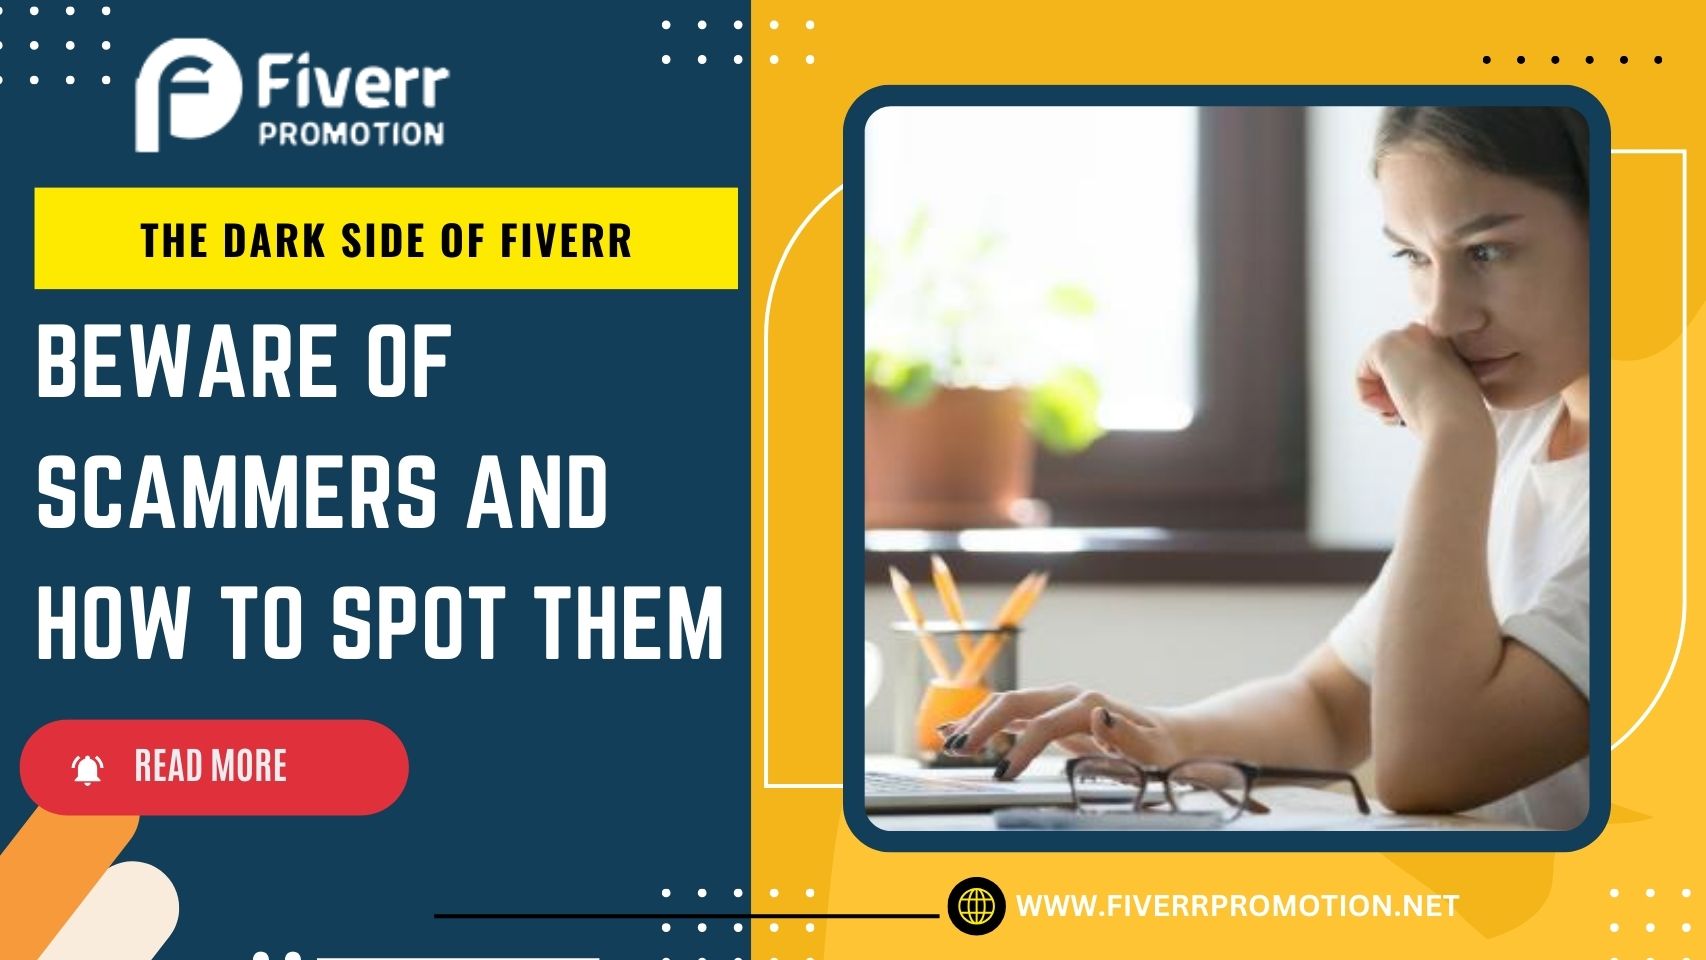 The Dark Side of Fiverr: Beware of Scammers and How to Spot Them